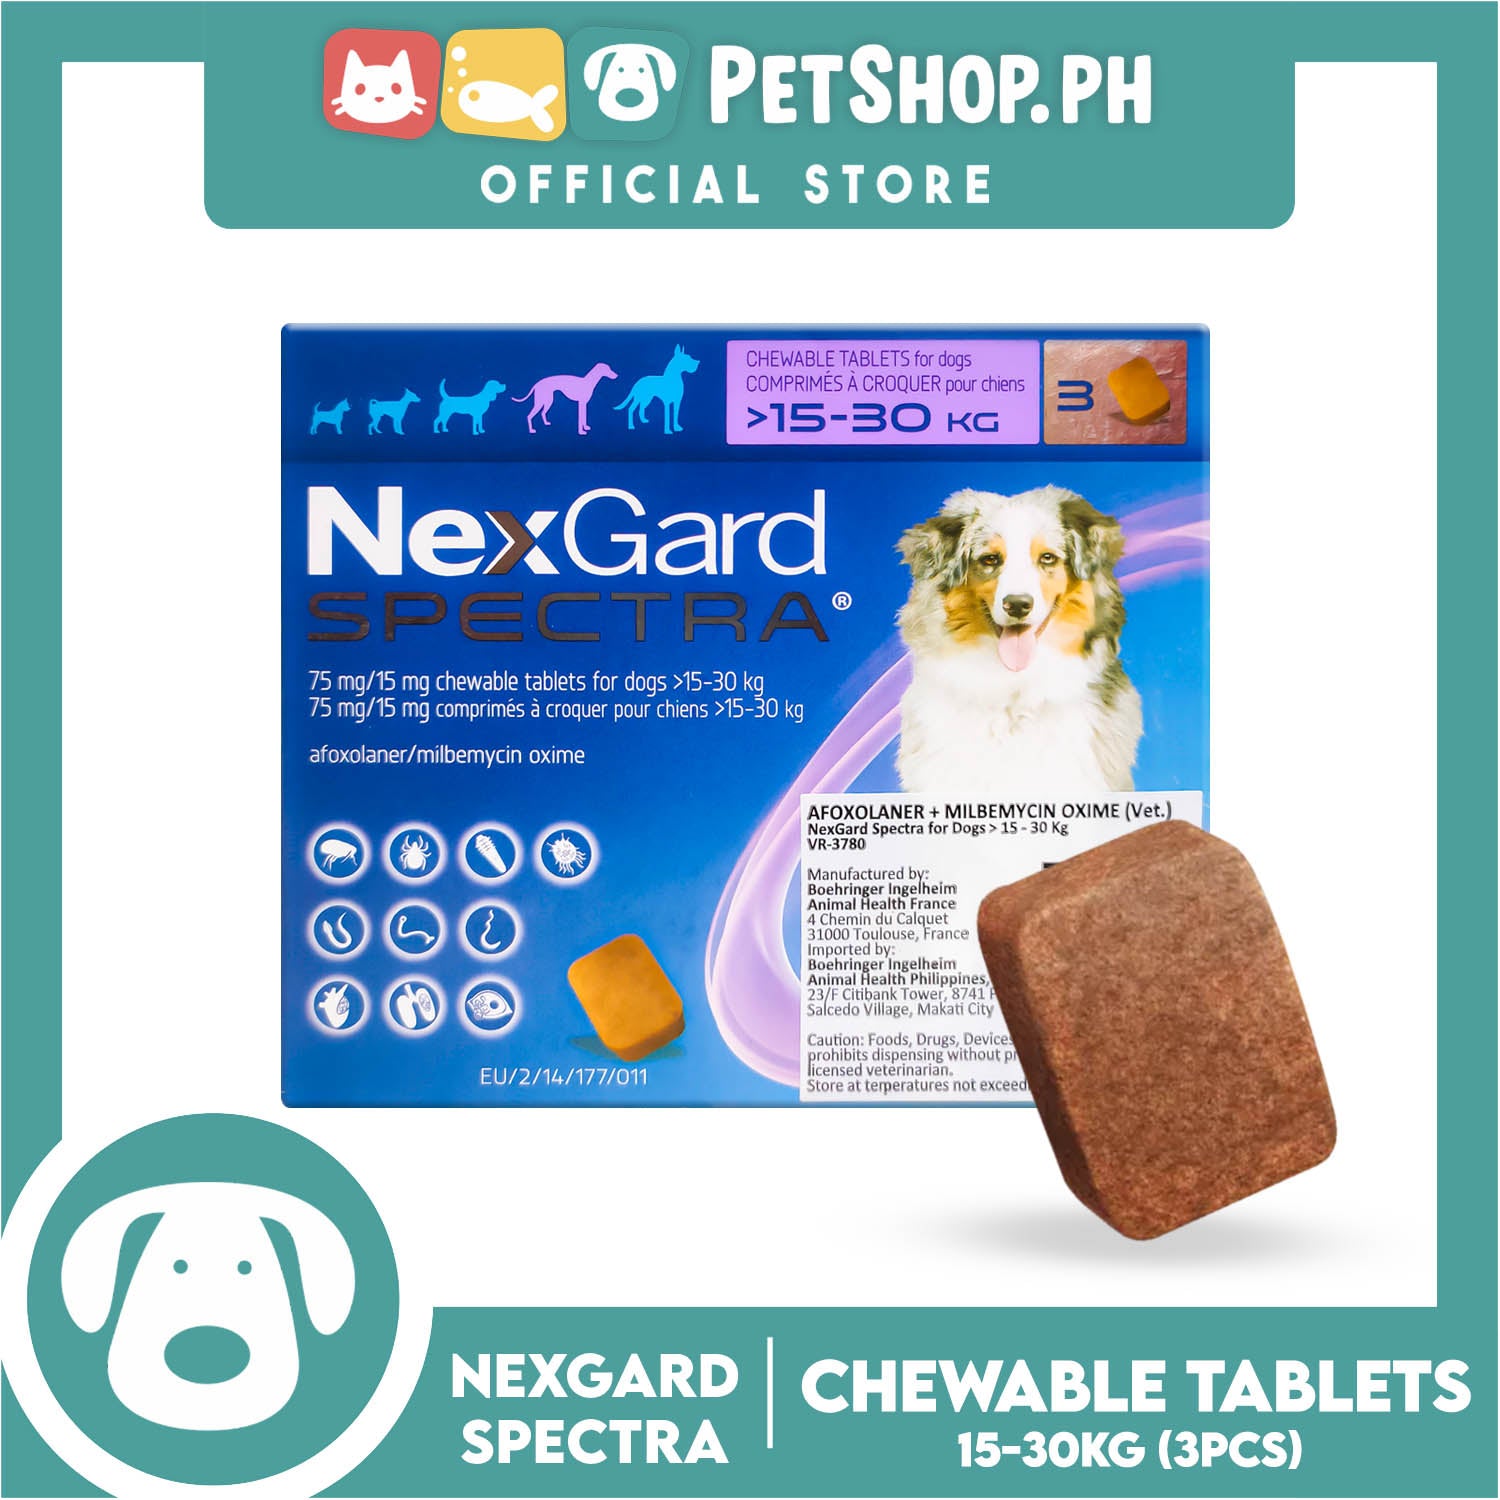 NexGard Spectra Chewable Tablets For Dogs Large 15-30kg 75mg/15mg